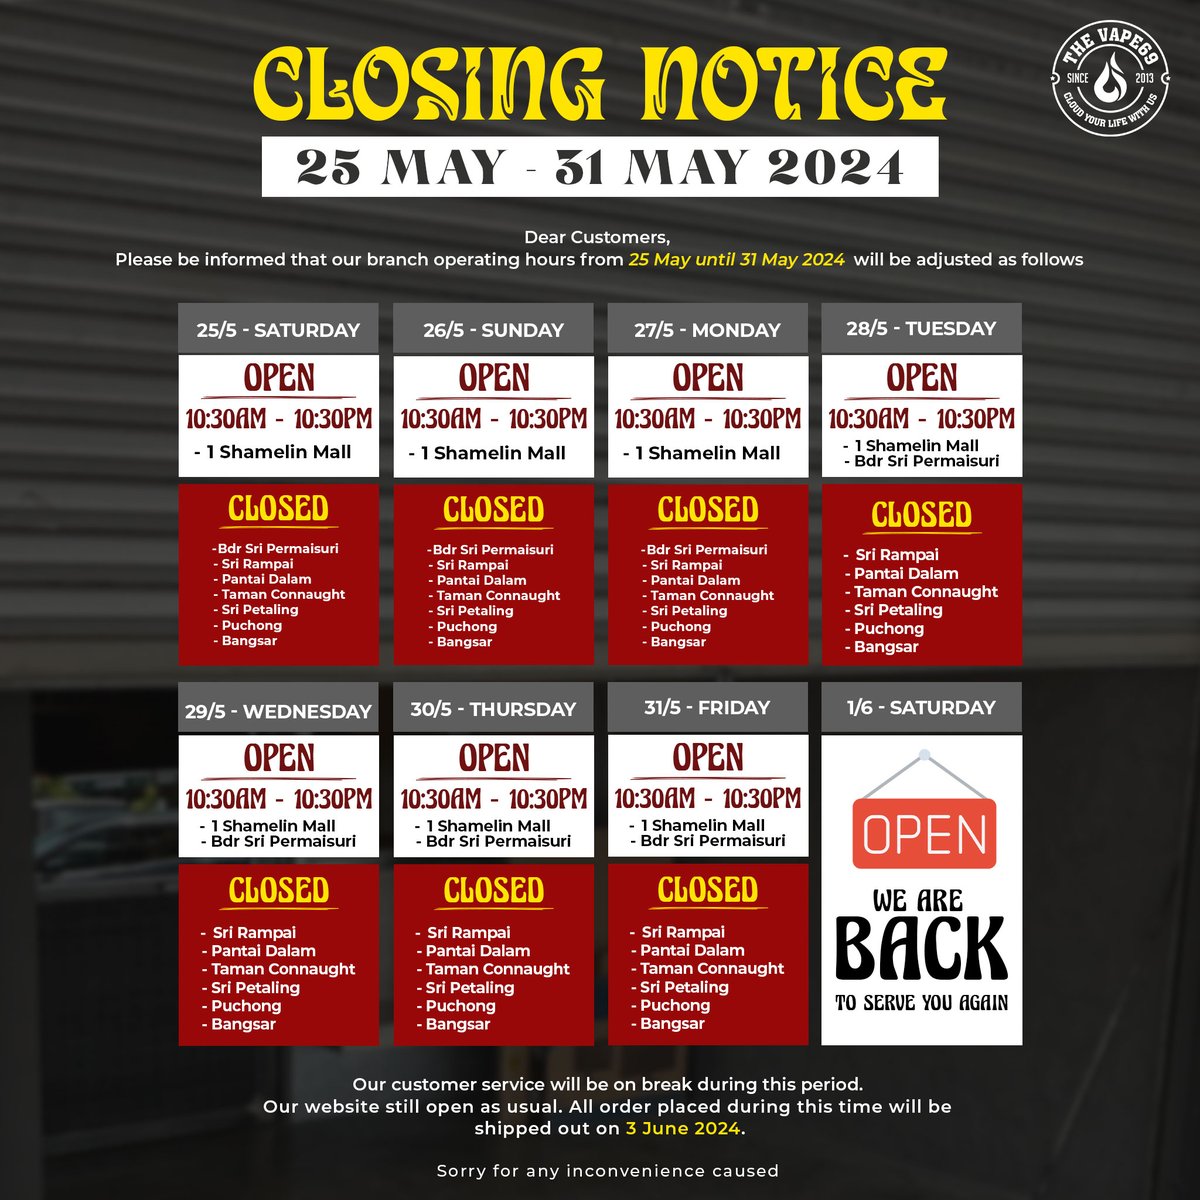 📣 CLOSING NOTICE 📣

Please be informed that all The Vape69 branches will be temporarily closed from May 25 to May 31. Only selected branches will remain open as follows.

Normal operations will resume on June 1, and customer service will be available again on June 3.